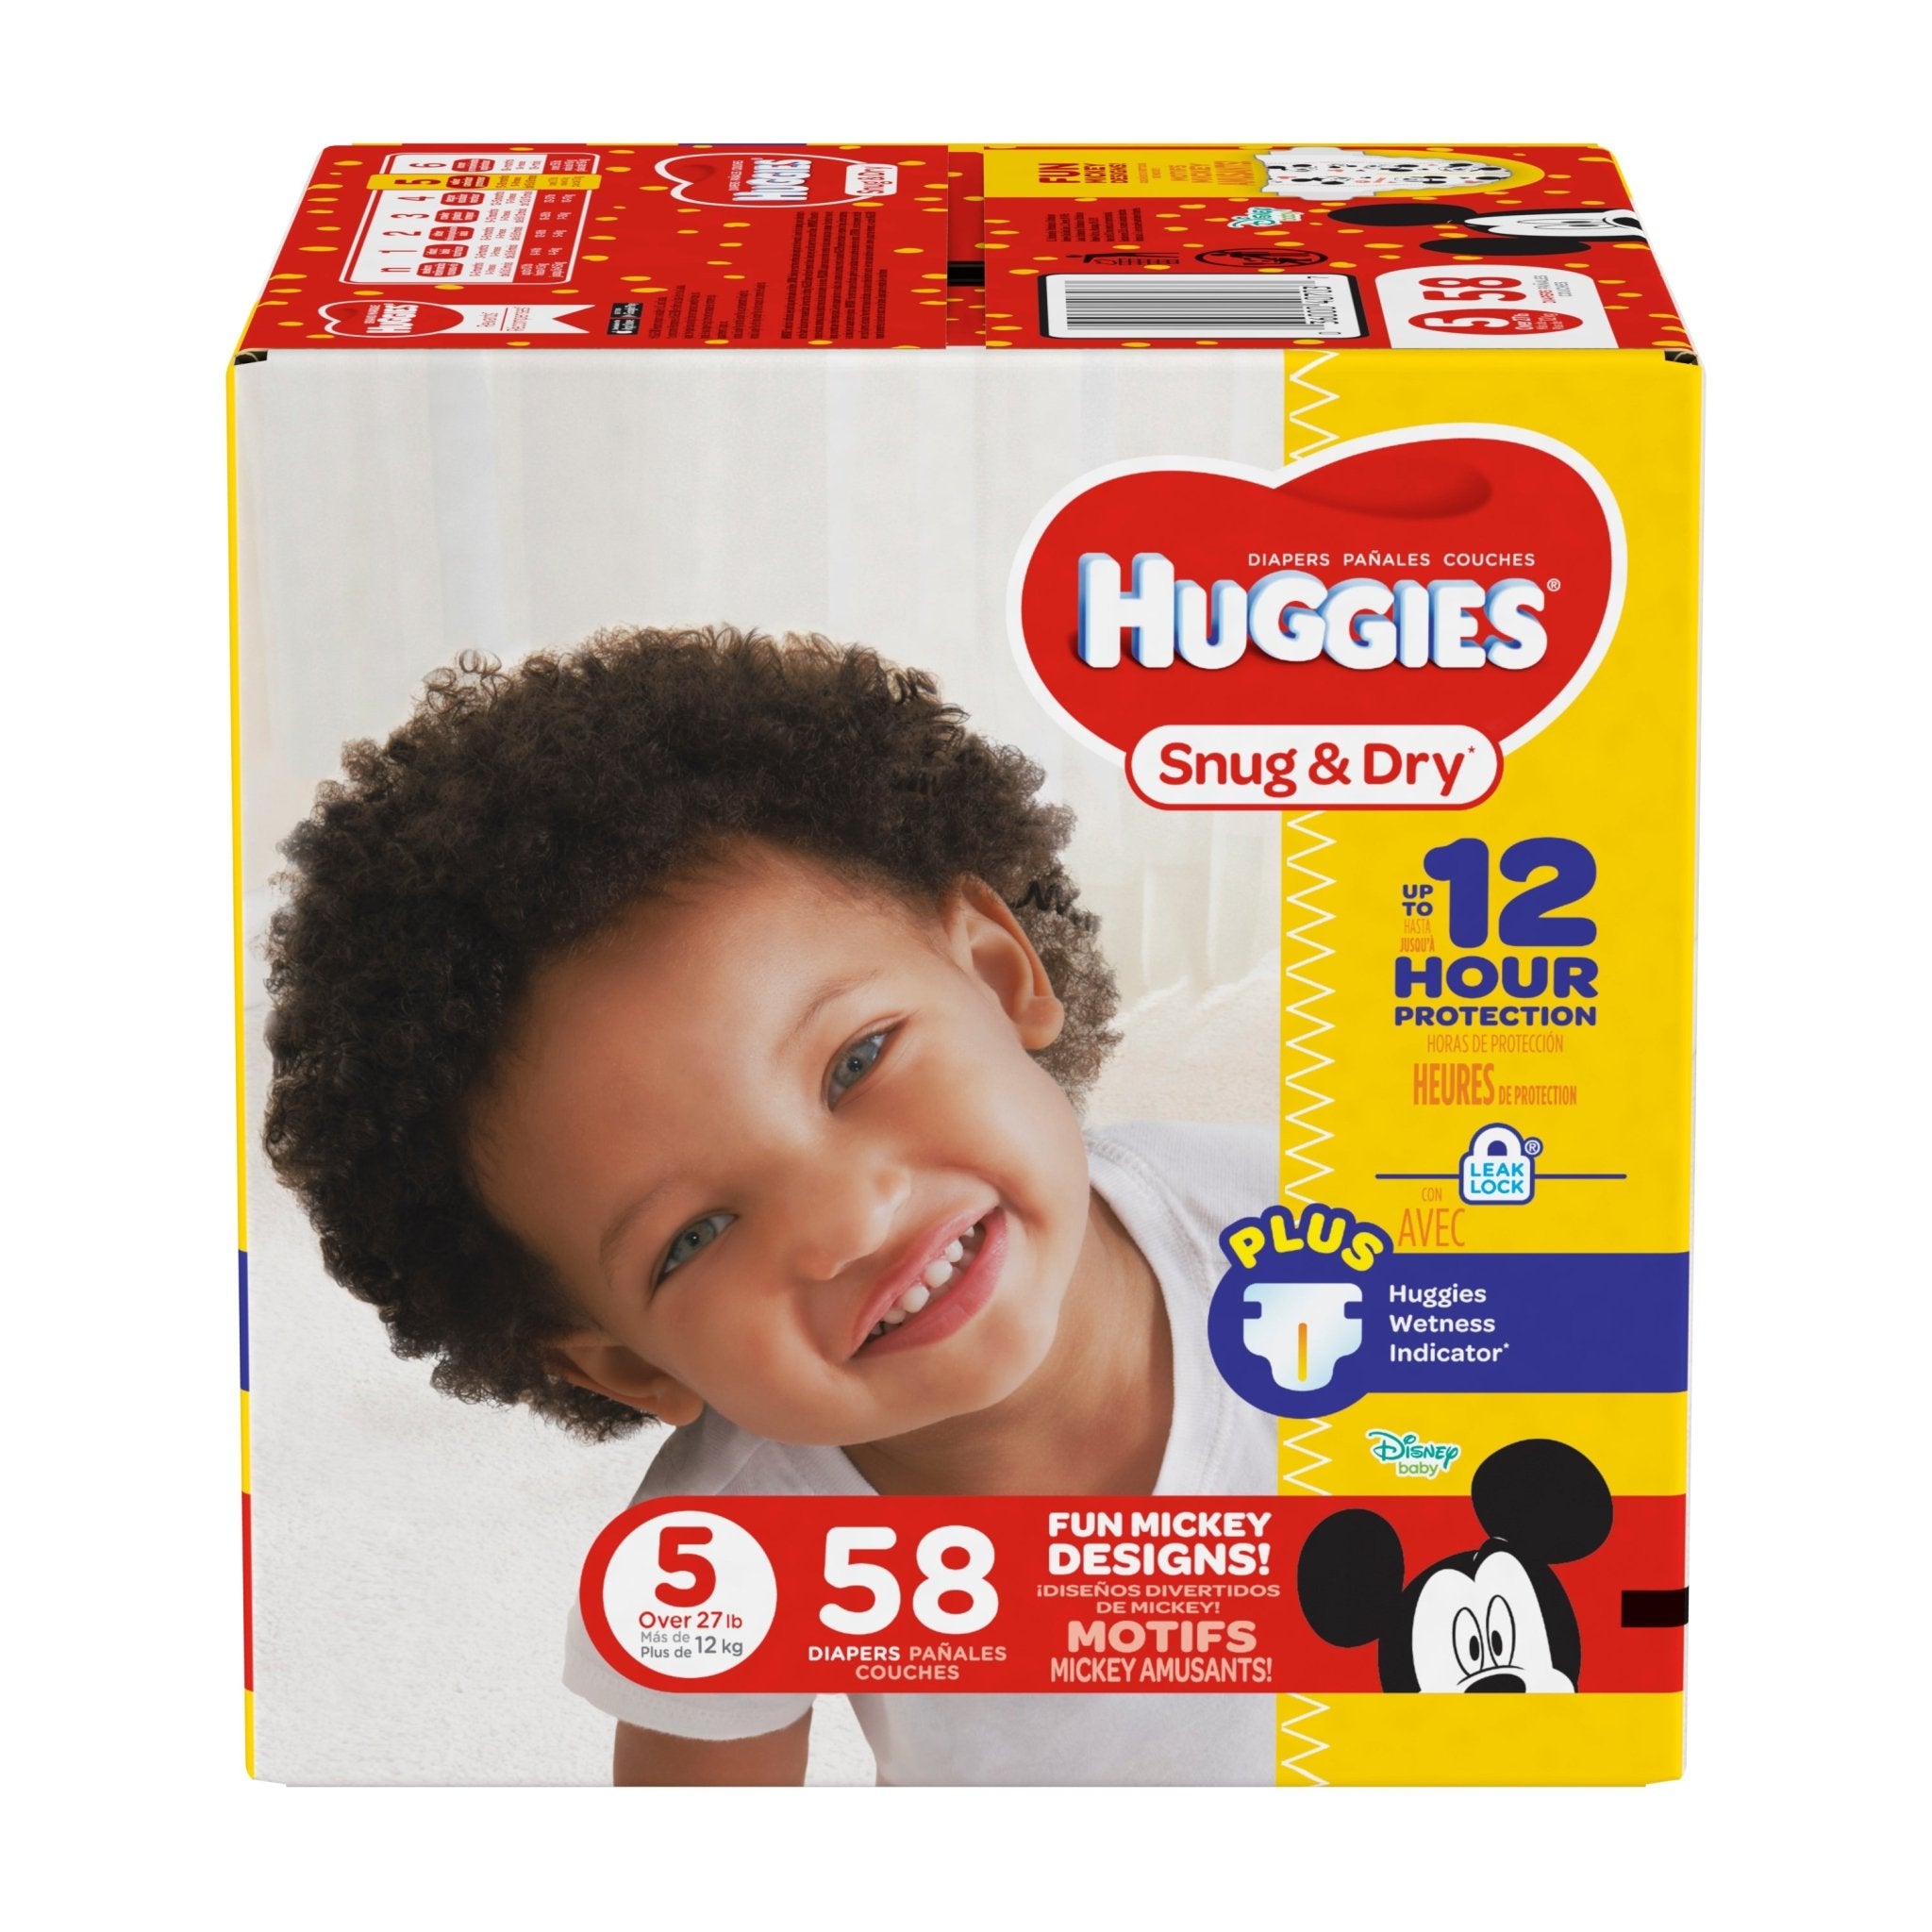 CA/58 - HUGGIES Snug &amp; Dry Diapers, Size 5, 58 Count (Packaging May Vary) - Discontinued By Manufacturer - Best Buy Medical Supplies